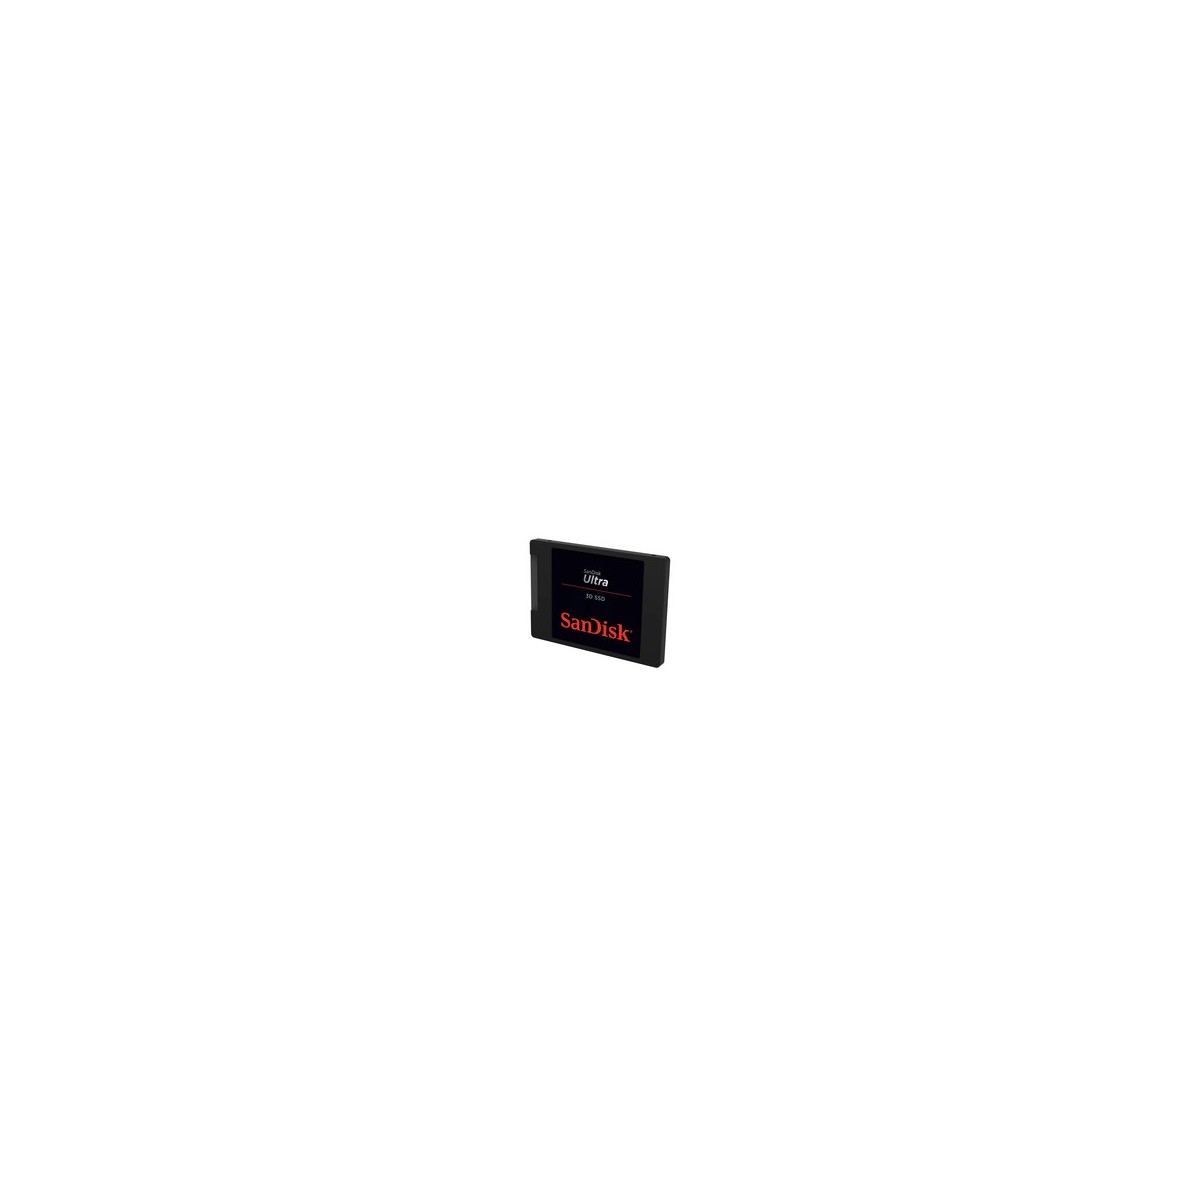 SanDisk Ultra 3D SSD 2TB - Solid State Disk - Serial ATA